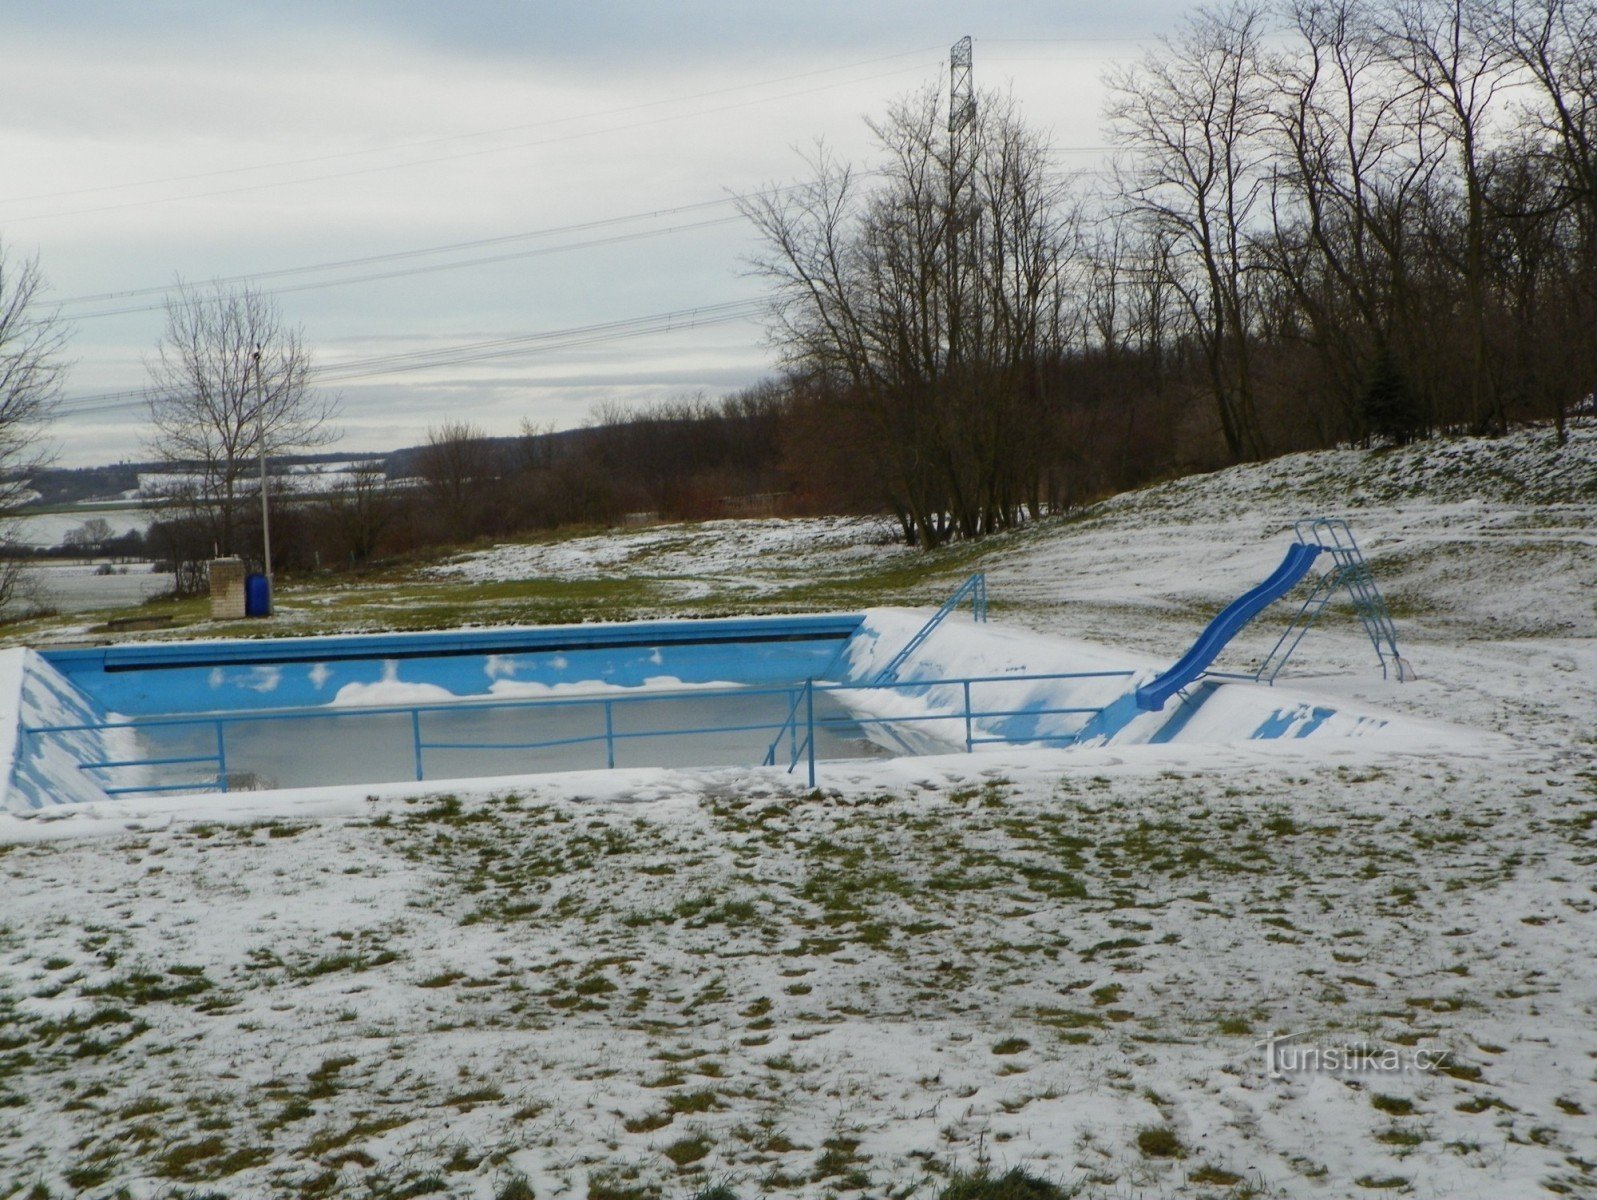 Swimming pool in Lesonice in winter